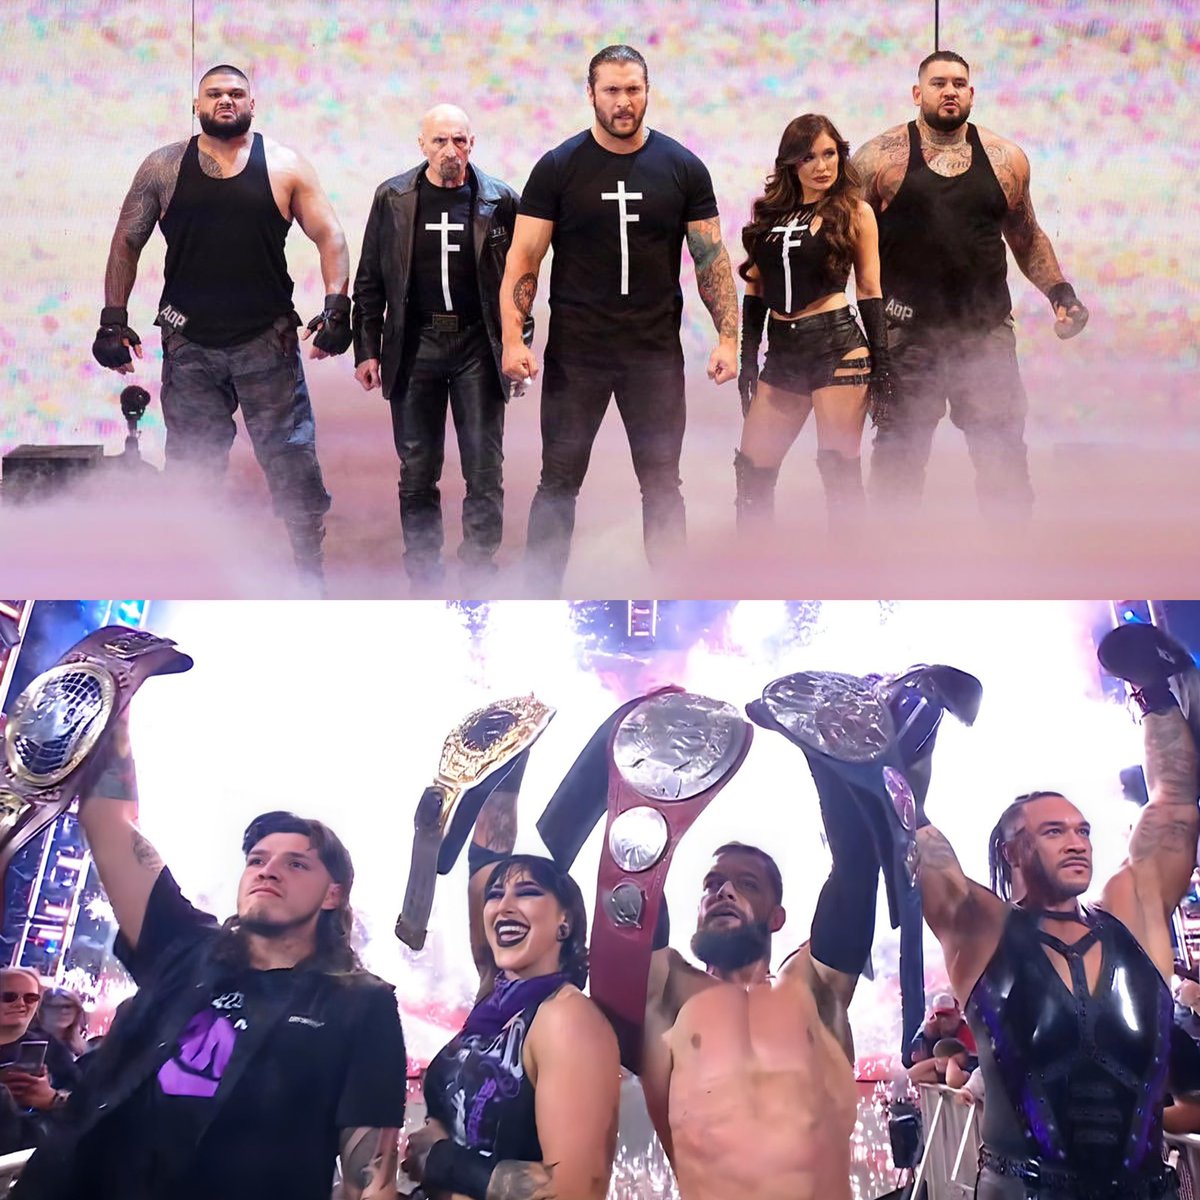 Should WWE treat #TheFinalTestament just like they treated The Judgment Day ? 

My faction got all the potential. 🔥👀